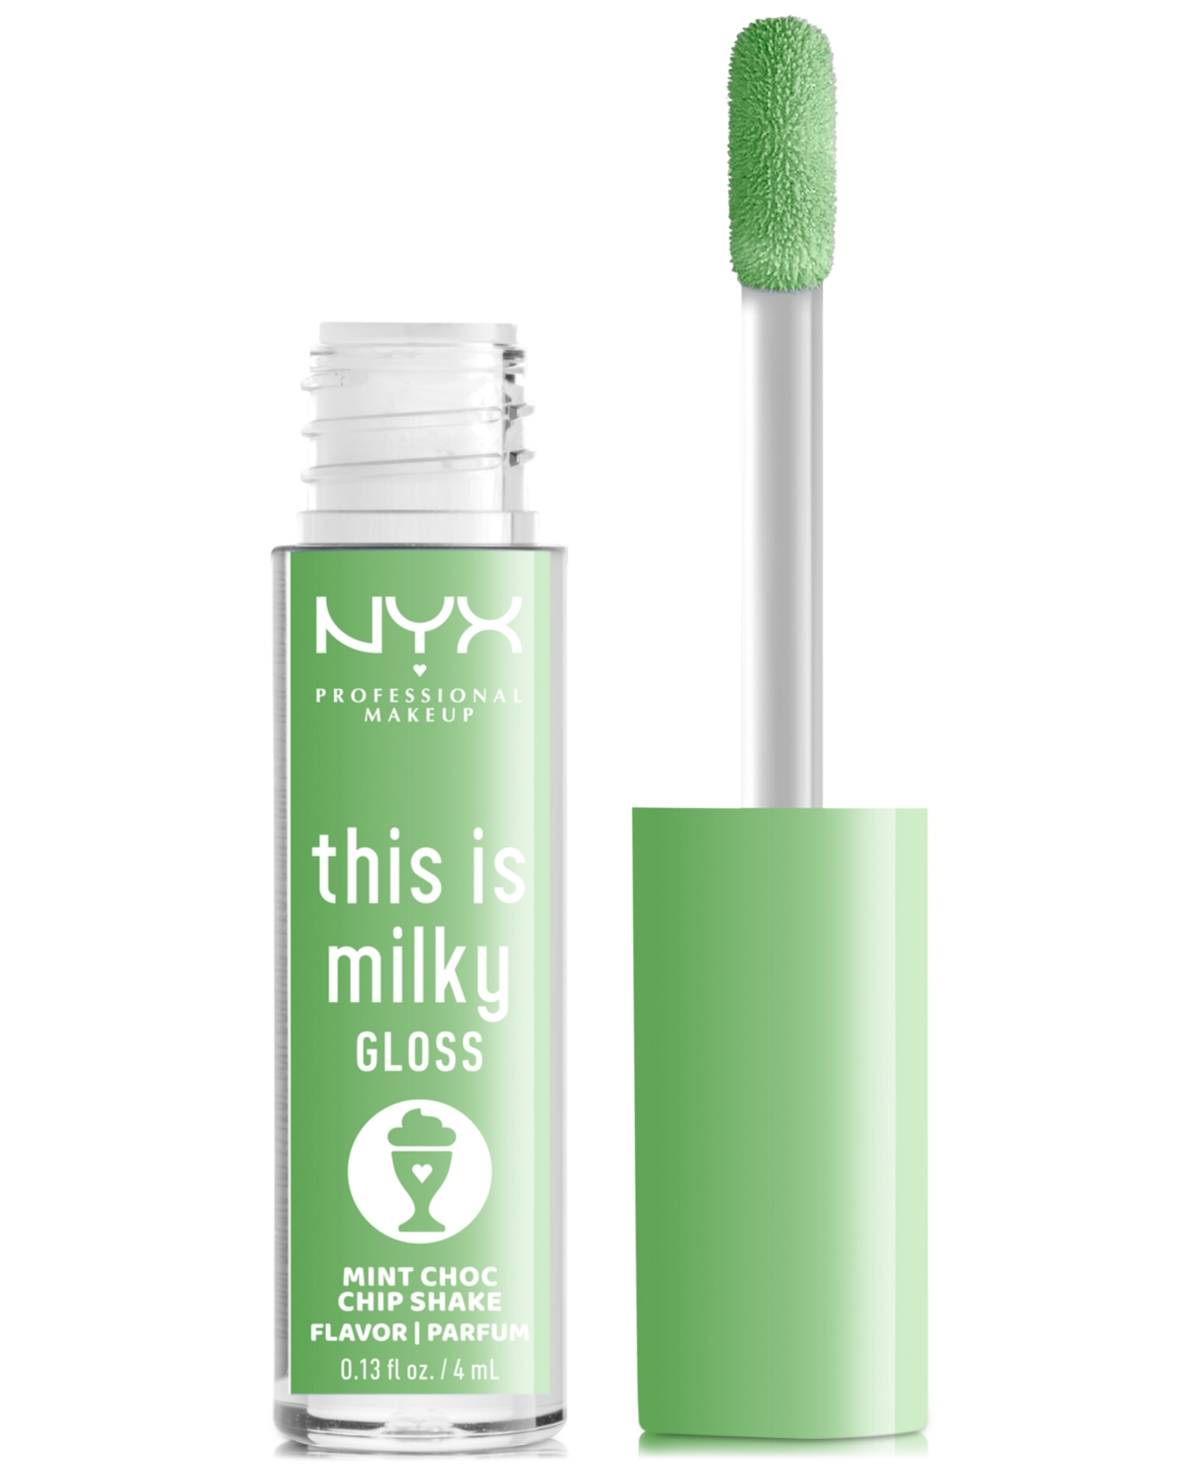 Nyx Professional Makeup This Is Milky Gloss In Mint Choco Chip